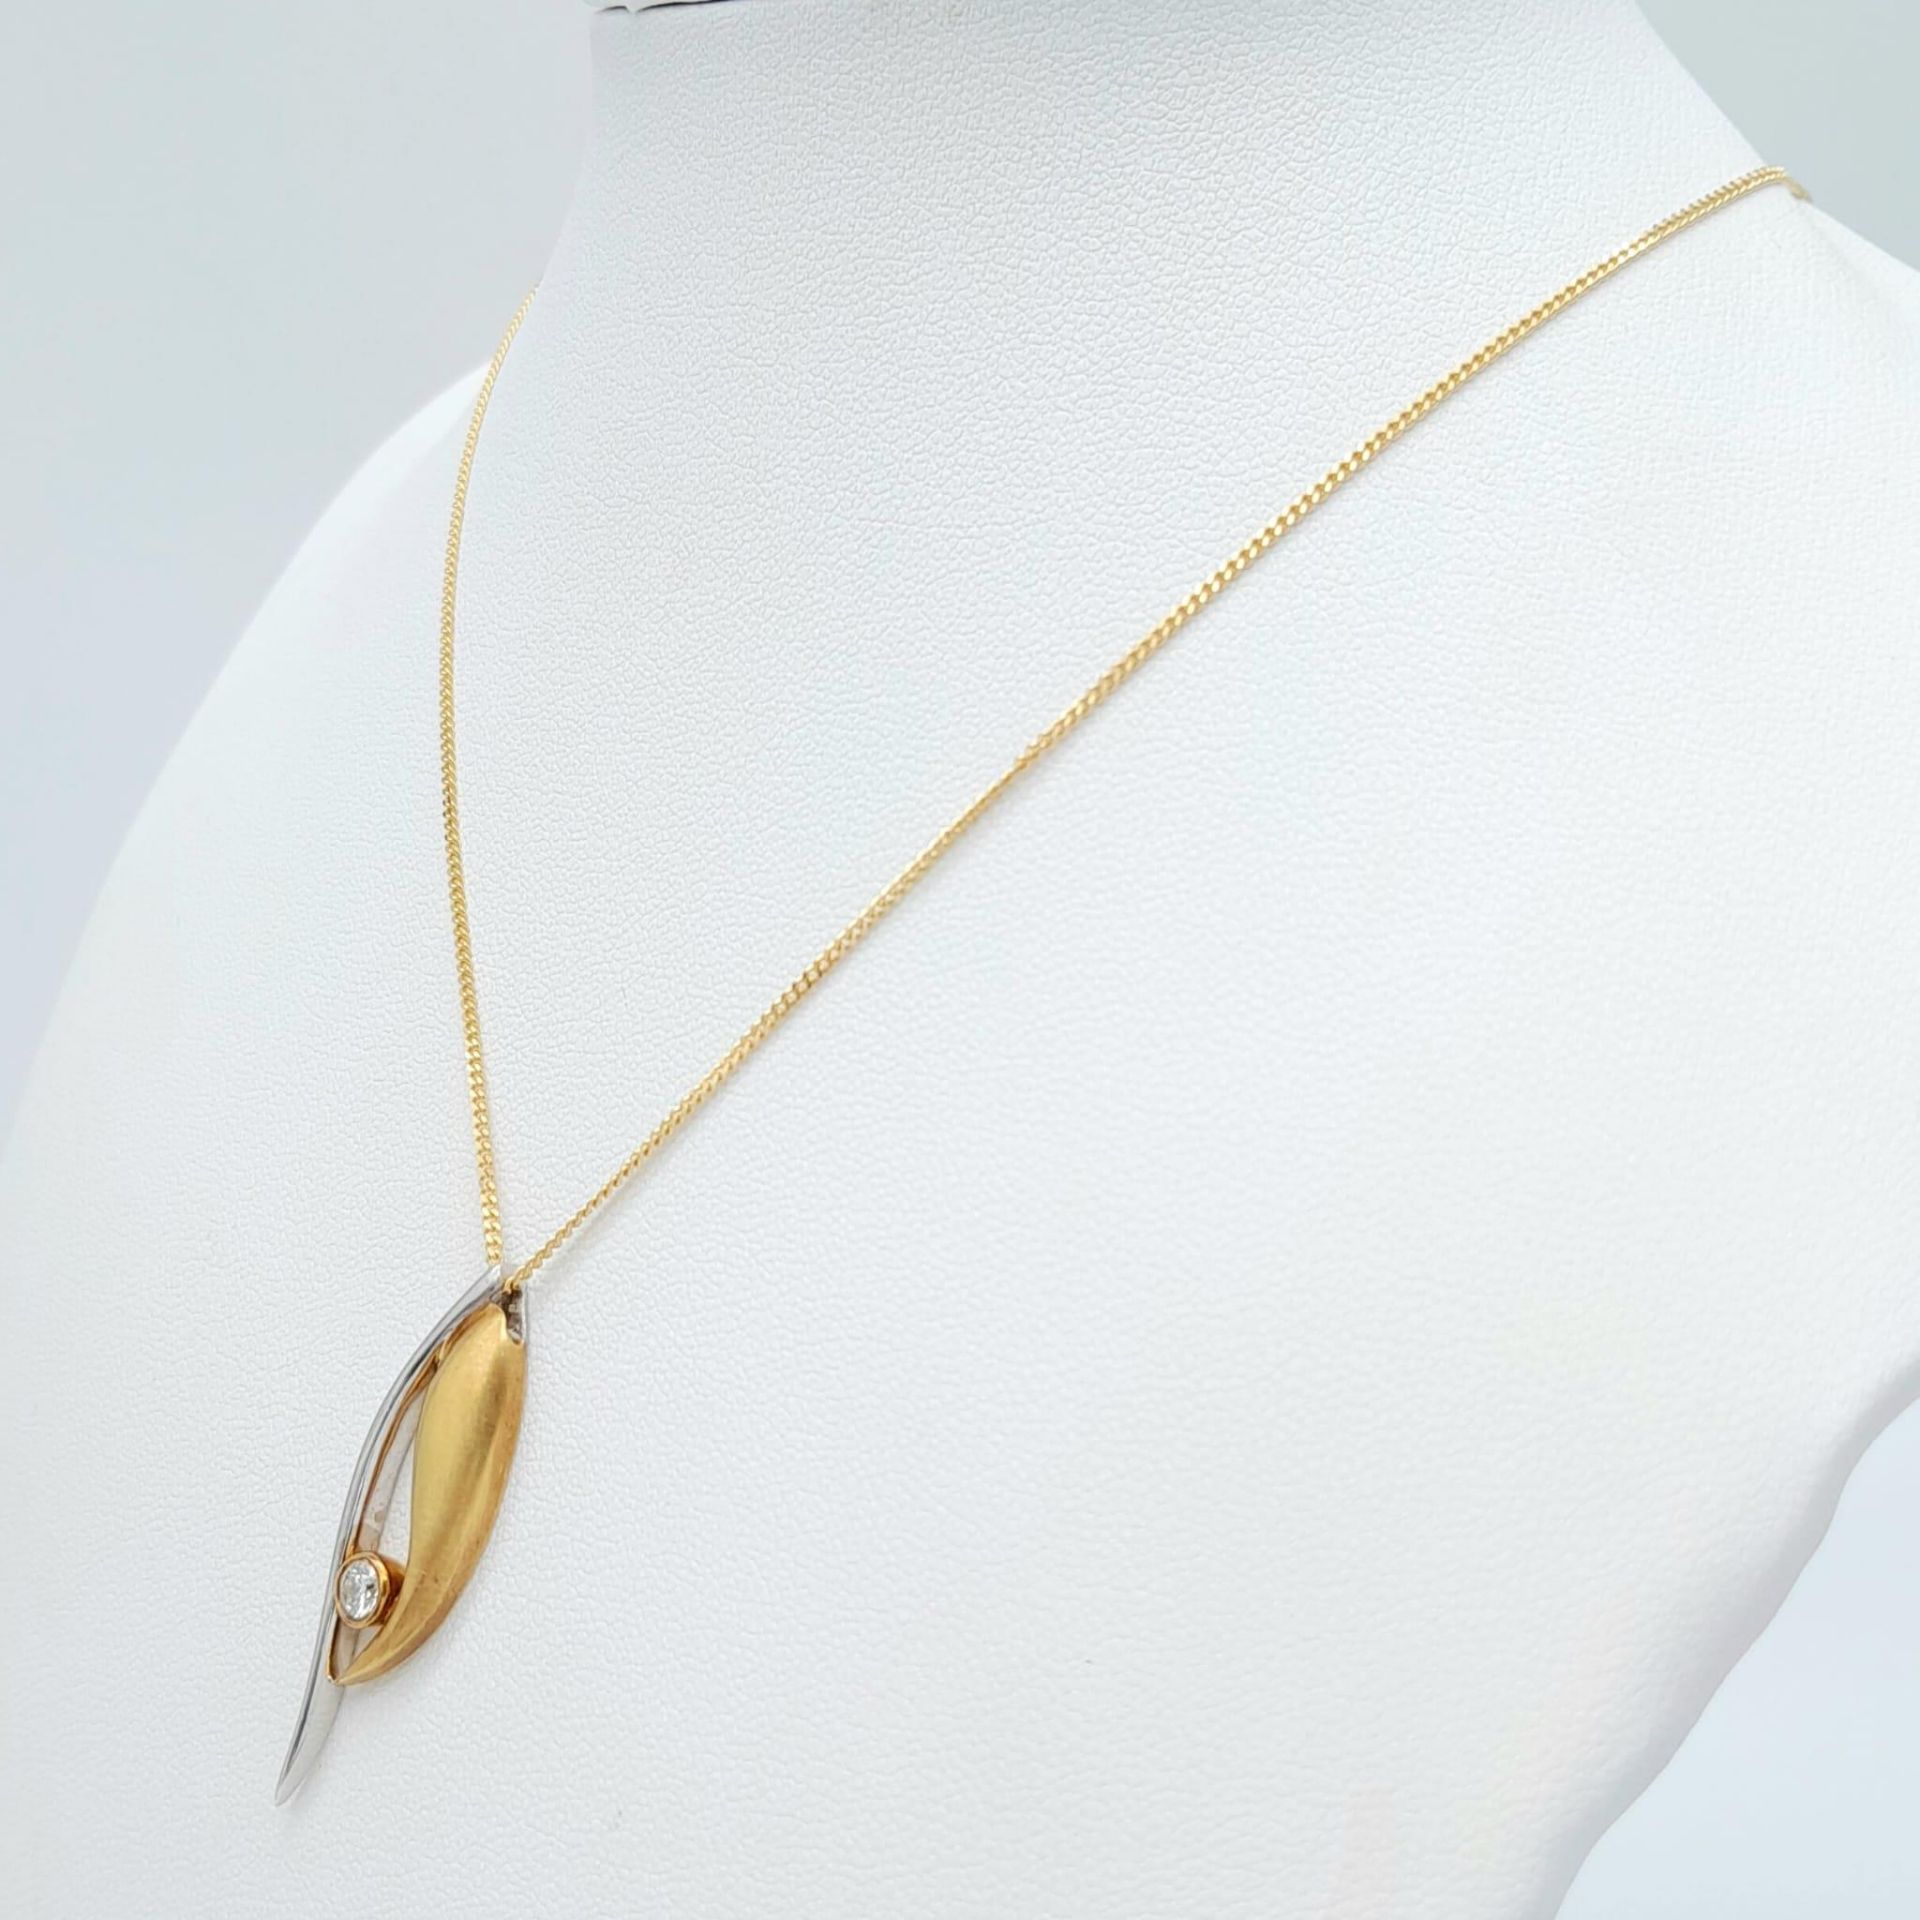 An 18K Bi Colour Gold Diamond Pendant on an 18K Yellow Gold Disappearing Necklace. 0.15ct diamond. - Image 3 of 11